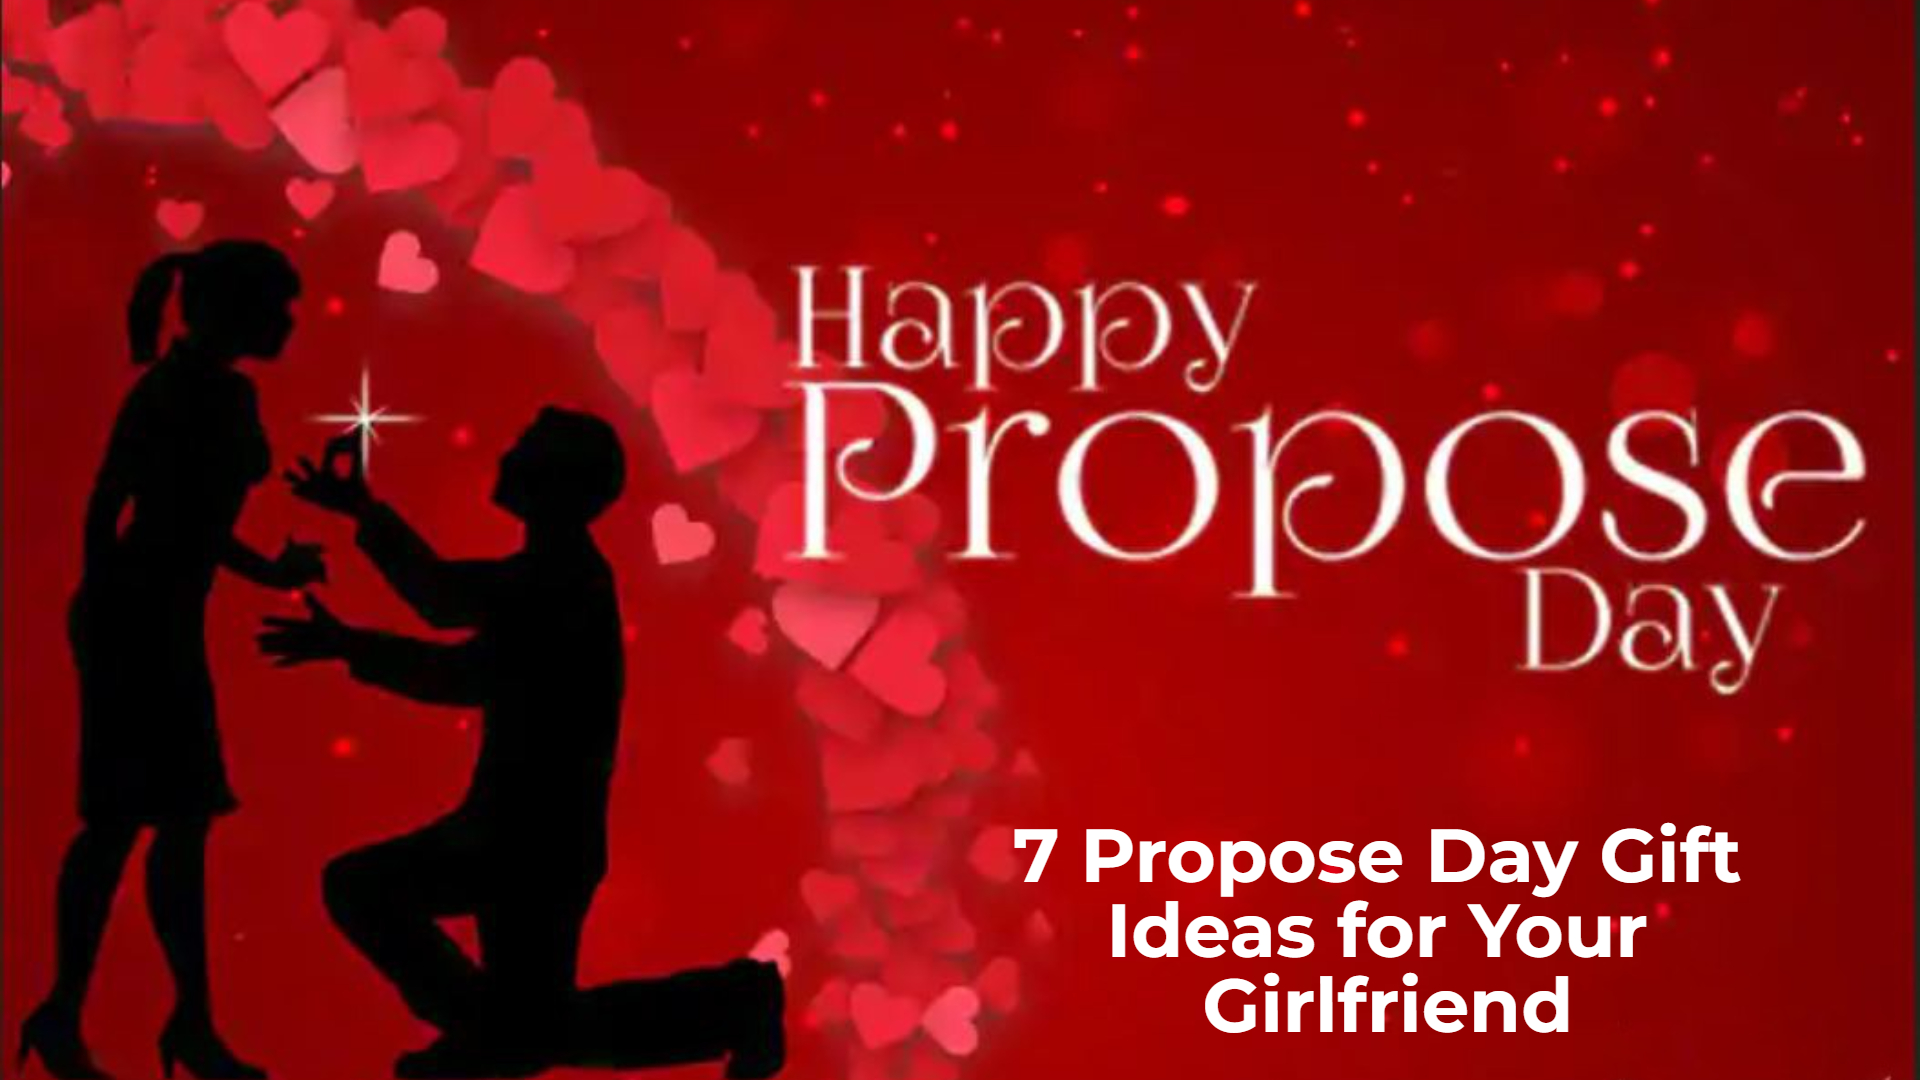 7 Propose Day Gift Ideas for Your Girlfriend